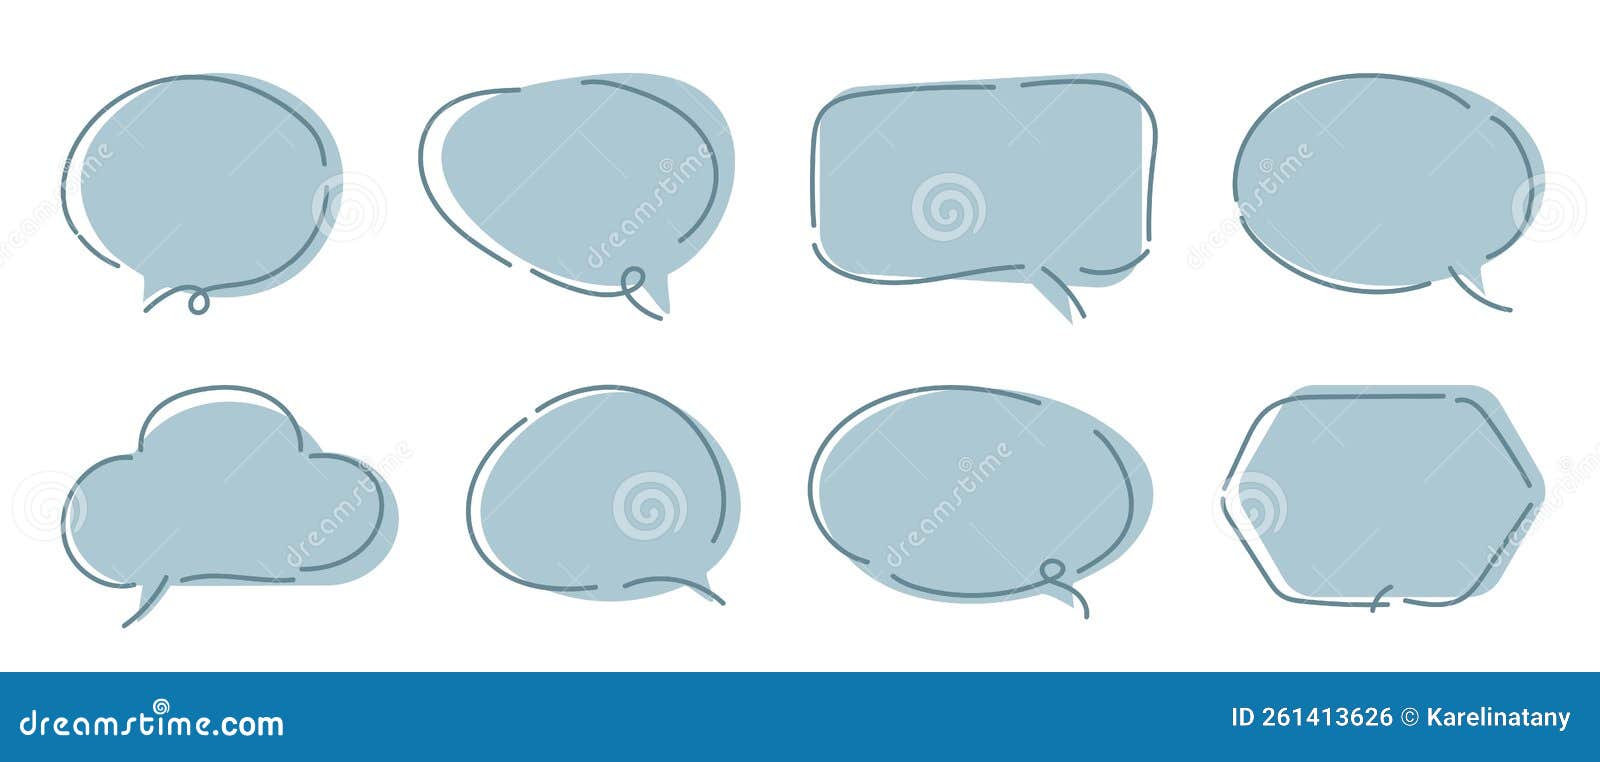  set of speech bubbles. dialog box icon, message template. white clouds for text, lettering. different  of